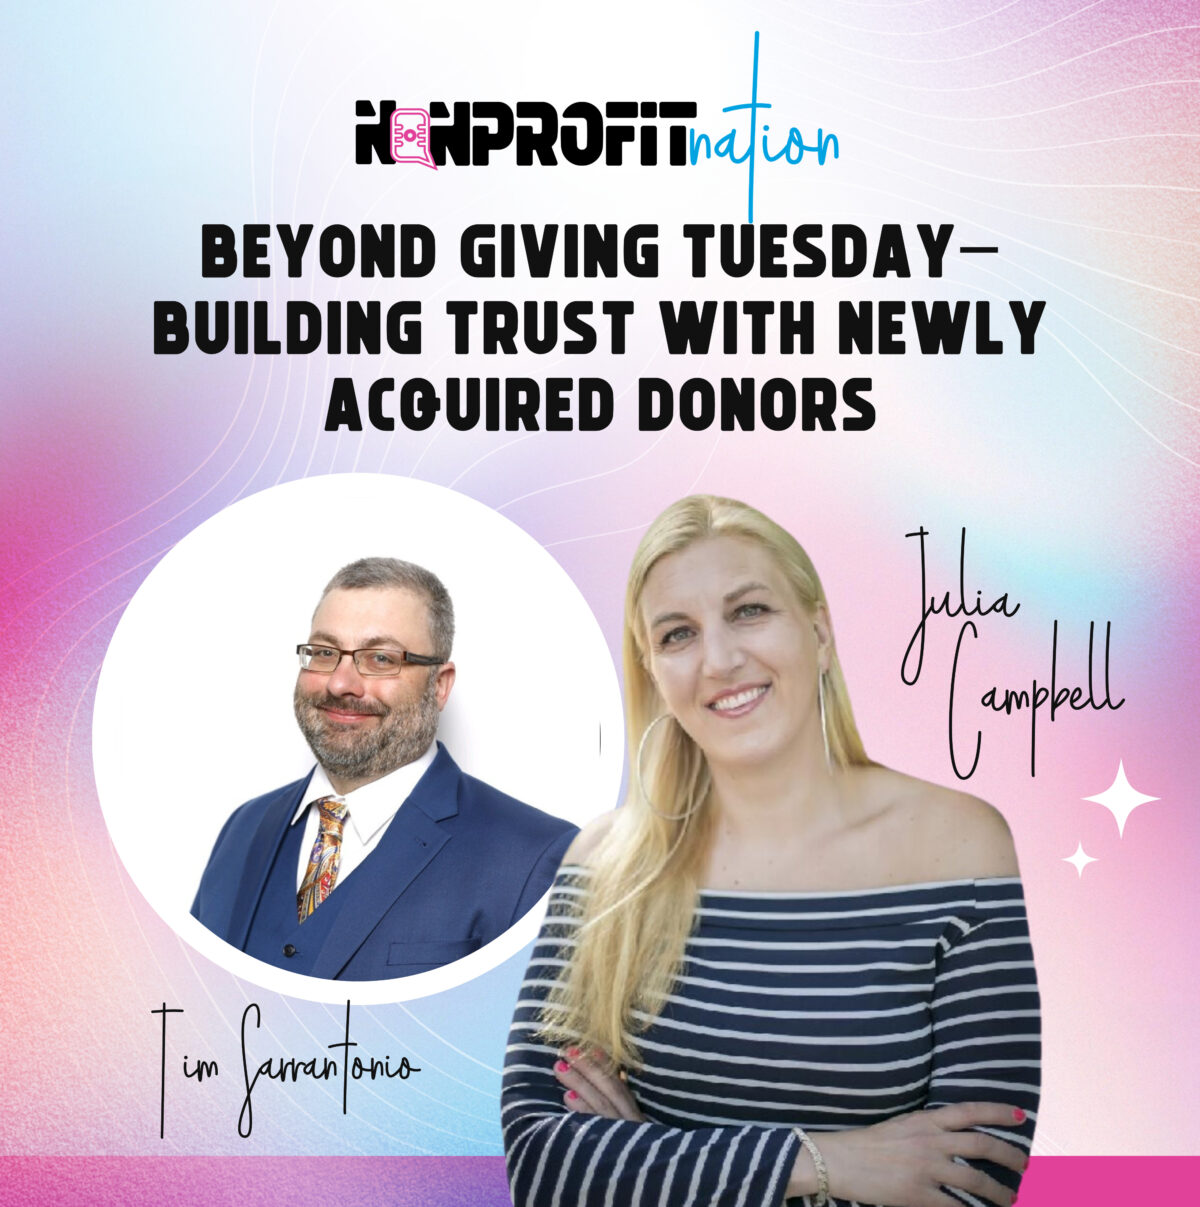 Beyond #GivingTuesday‒Building Trust With Newly Acquired Donors with Tim Sarrantonio